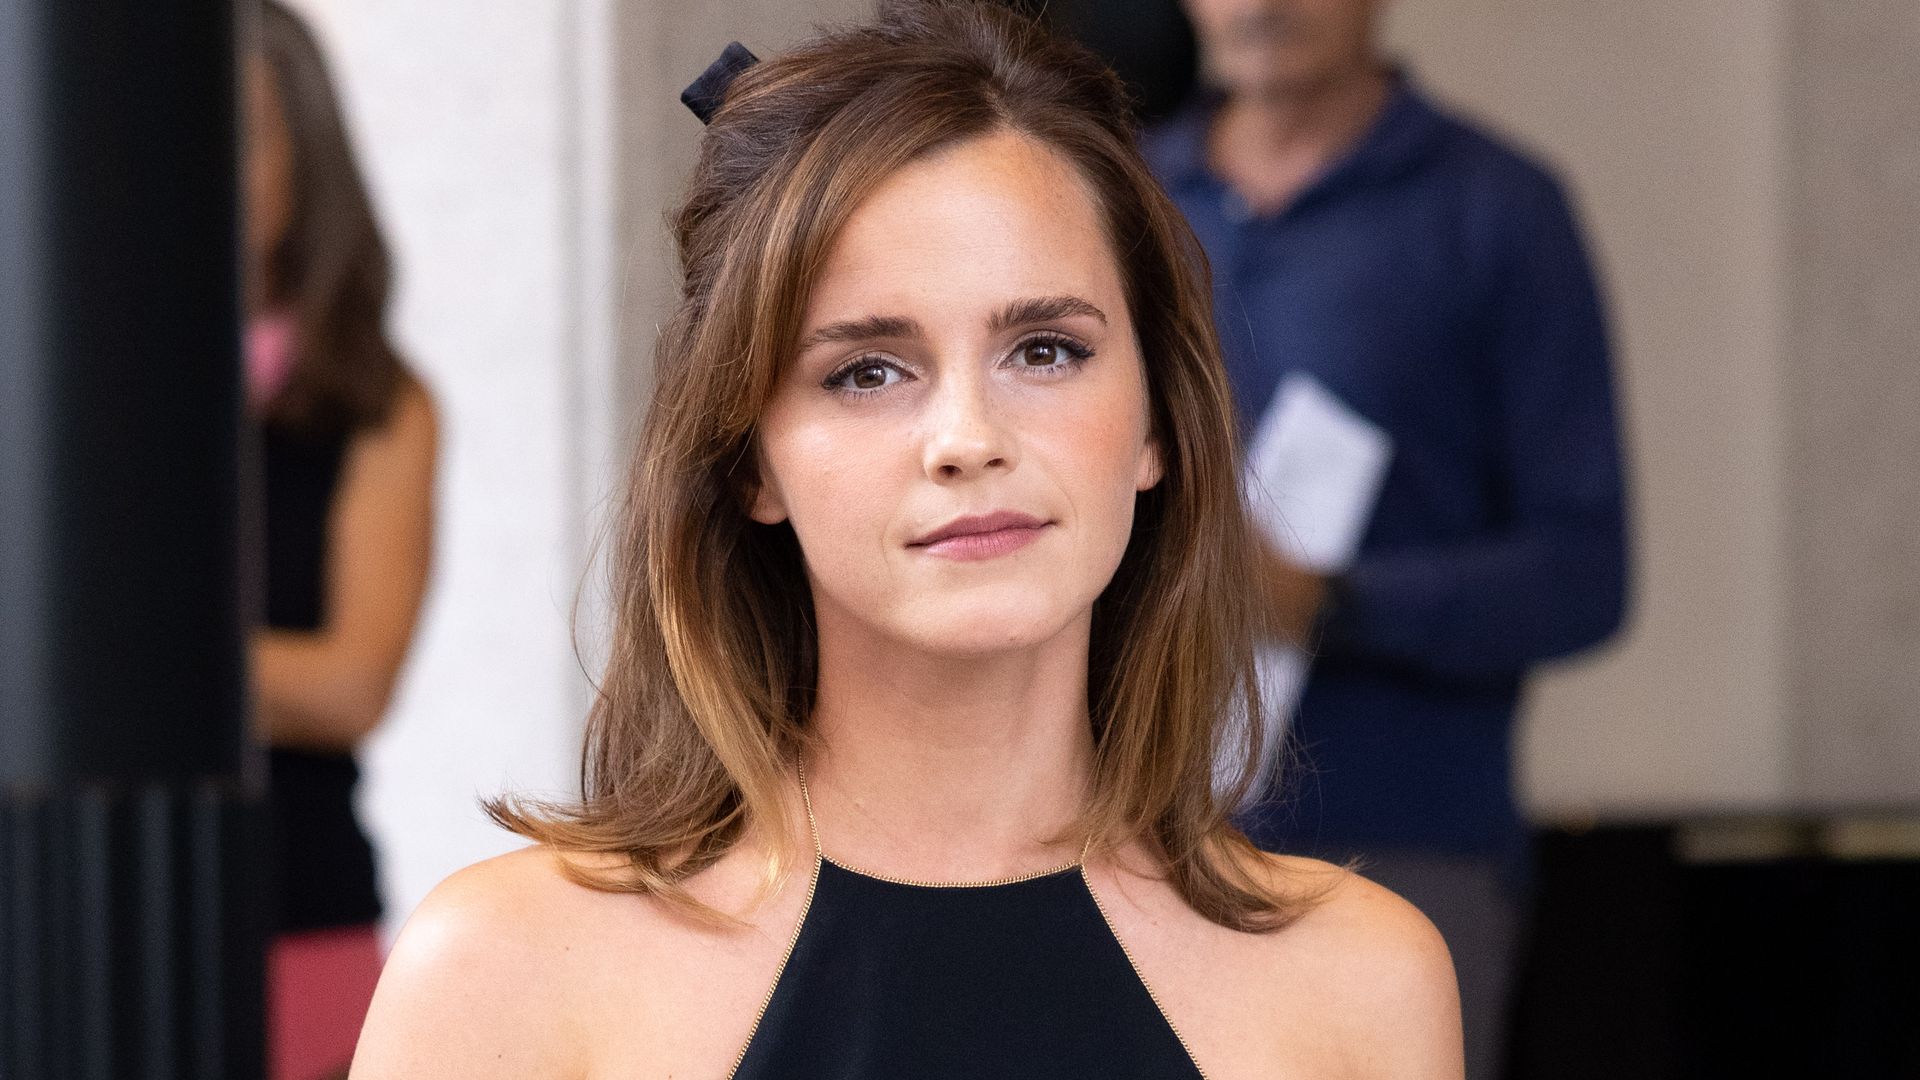 Emma Watson looks after her health